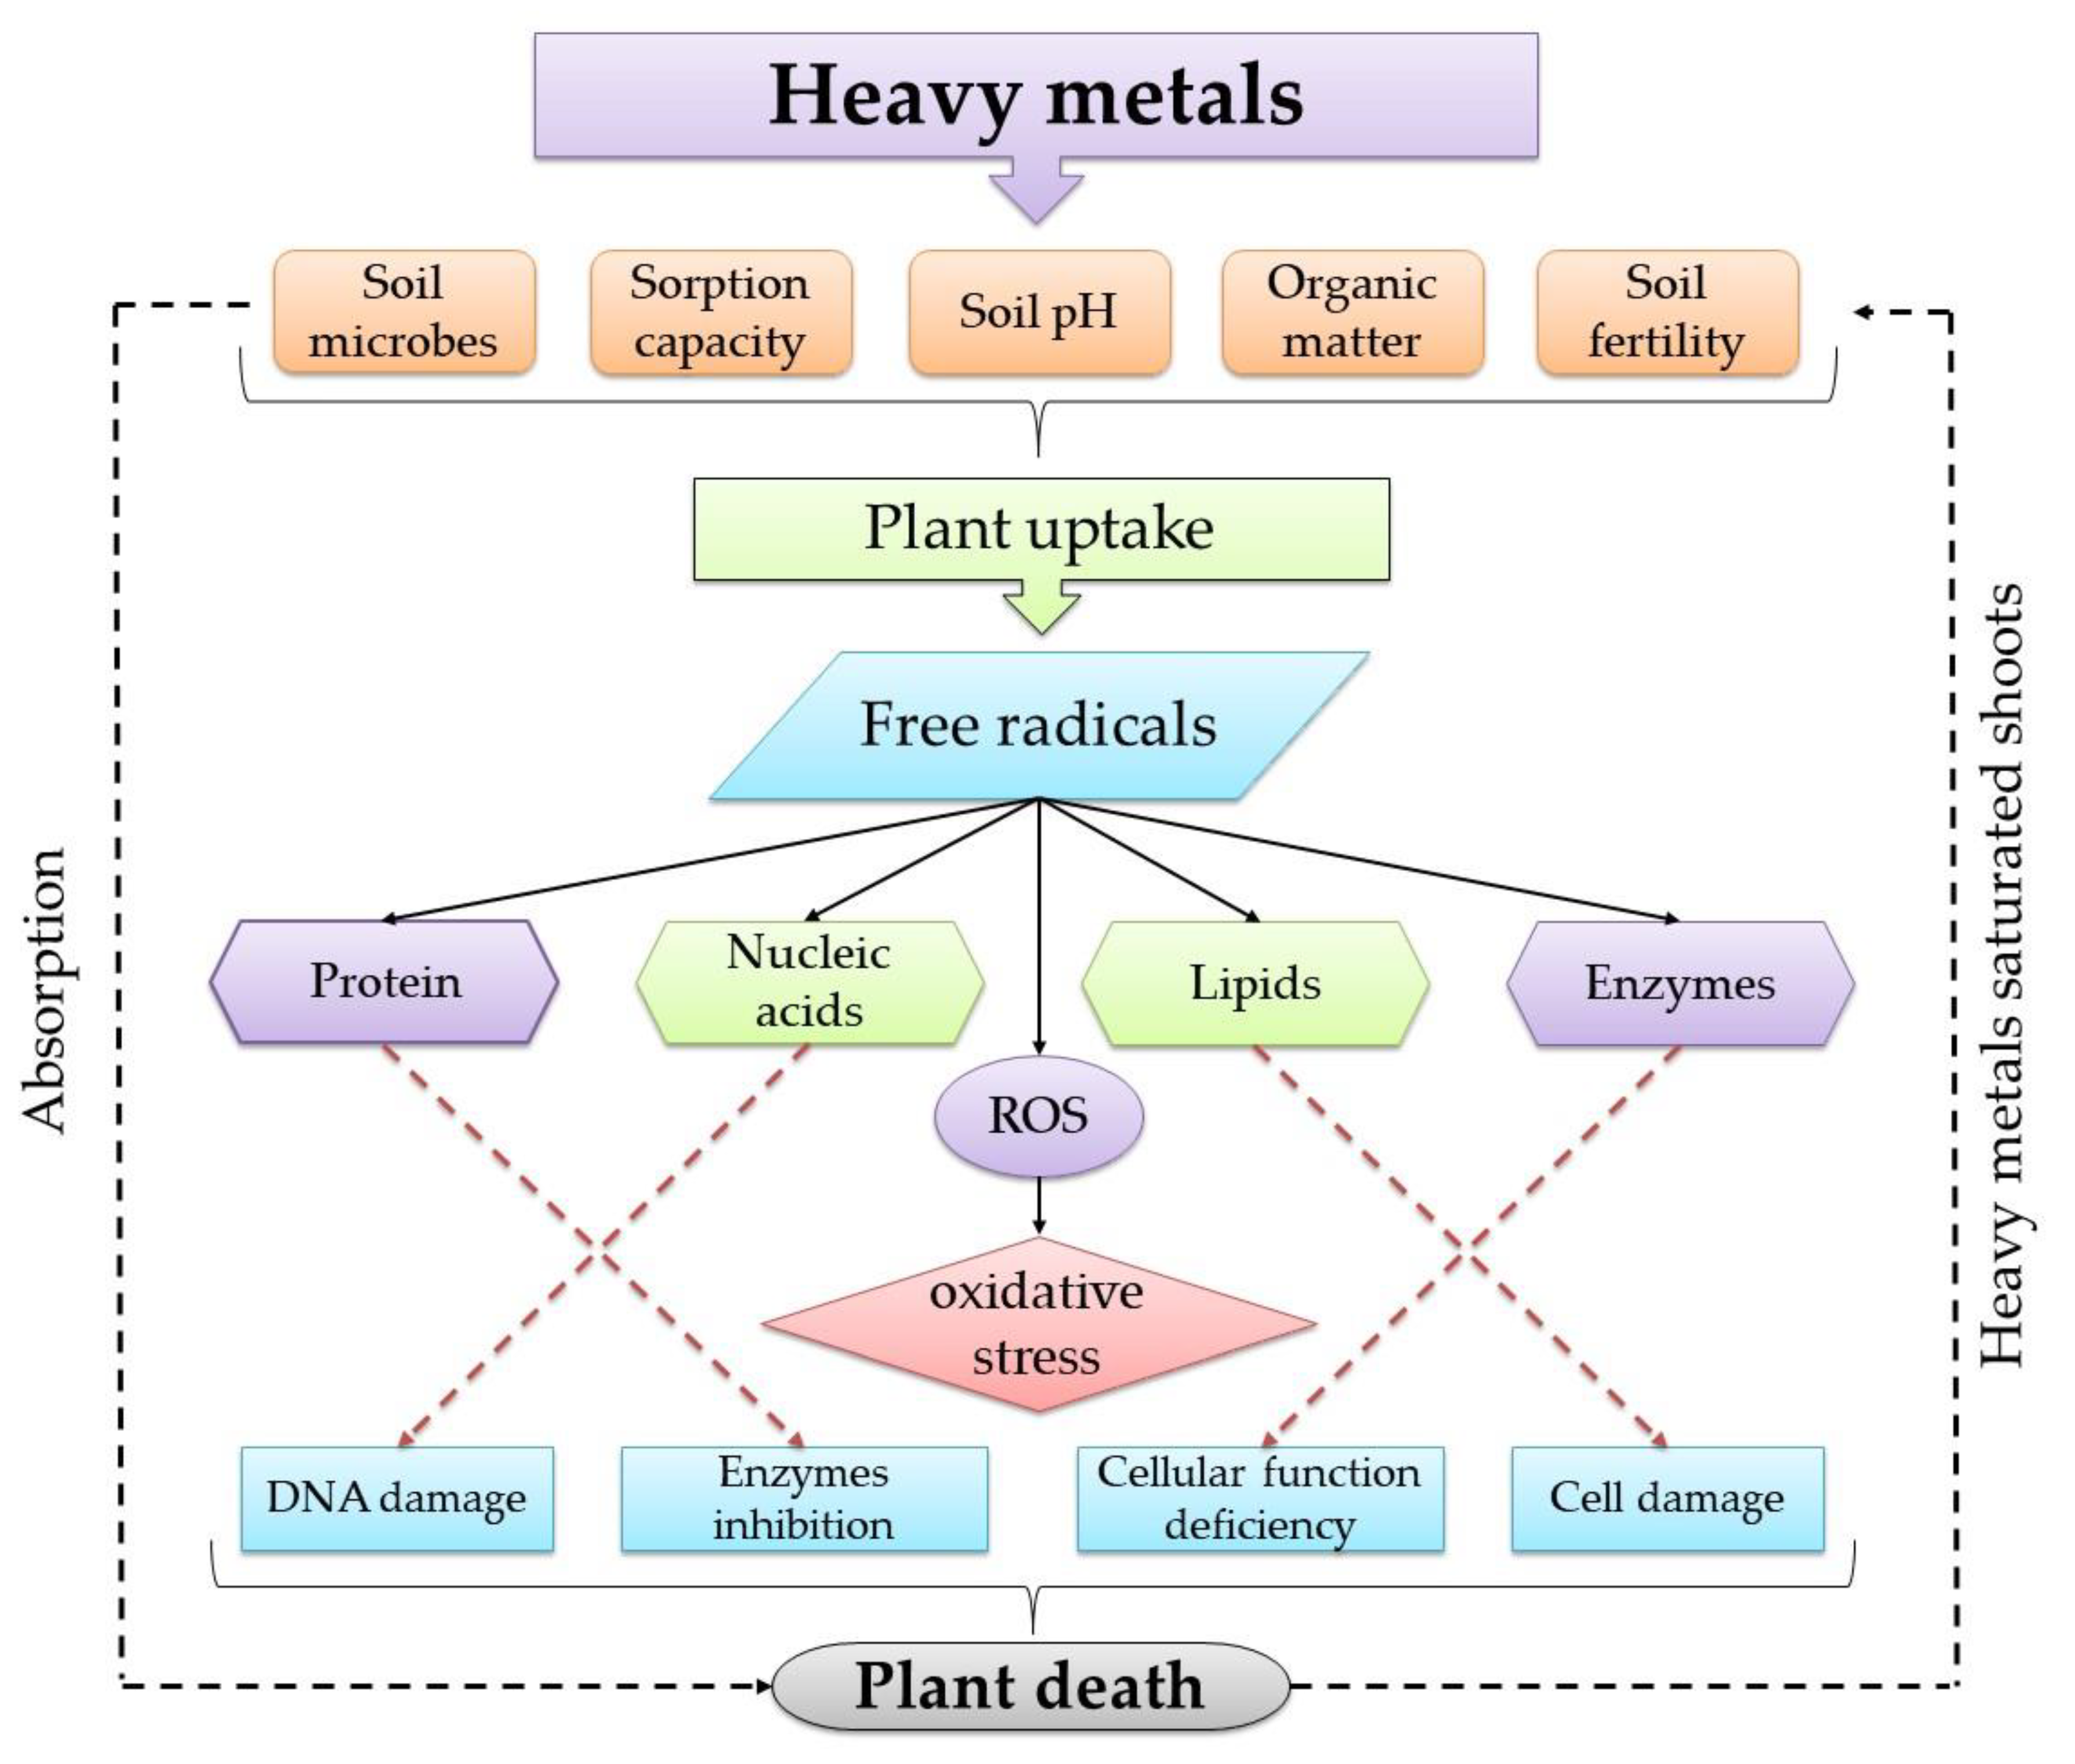 Correlation between the amount of heavy metals in the roots and